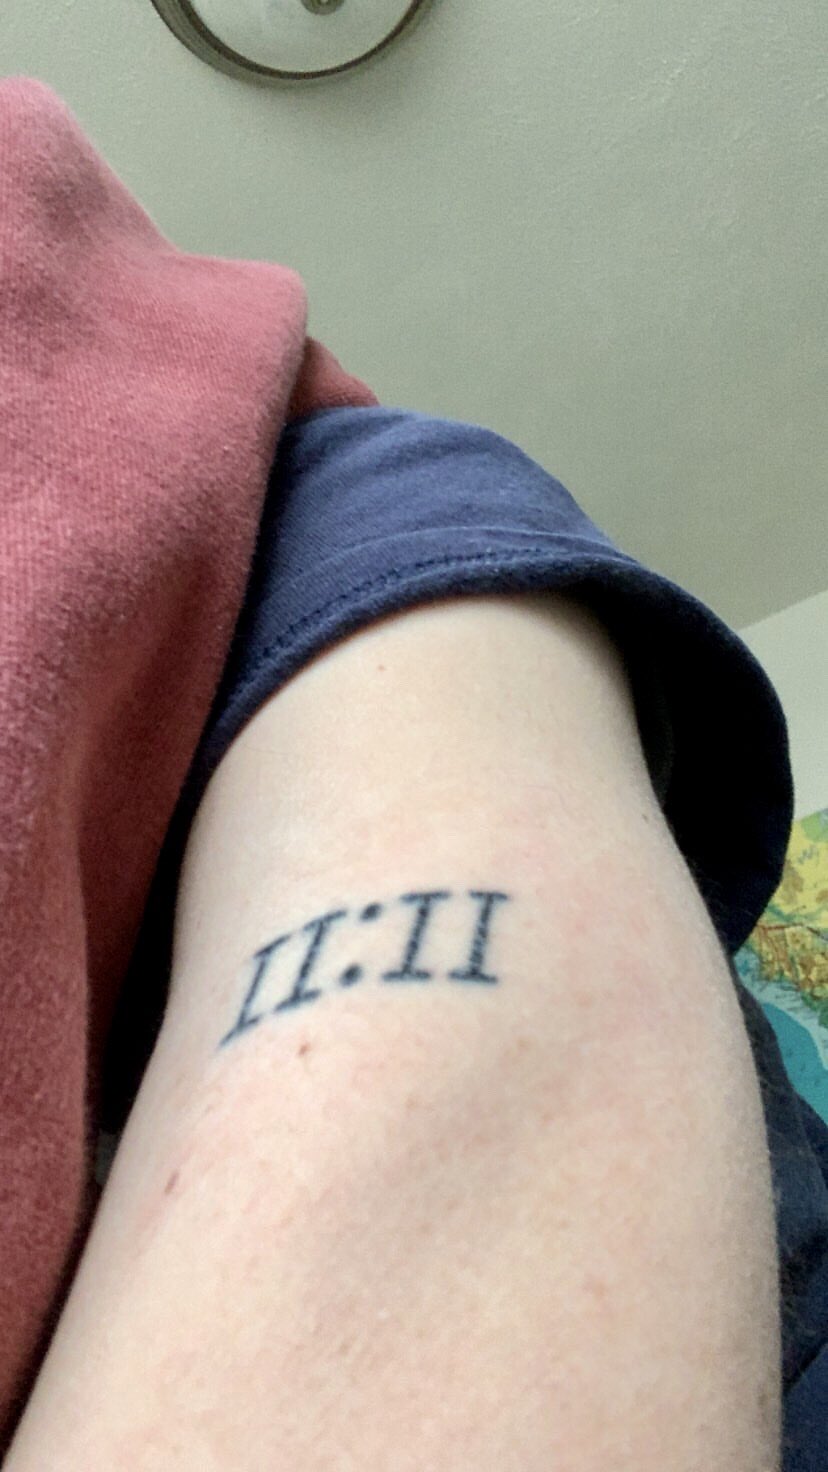 Buy 1111 Numerology Temporary Tattoo Eleven Synchronicity Small Online in  India  Etsy